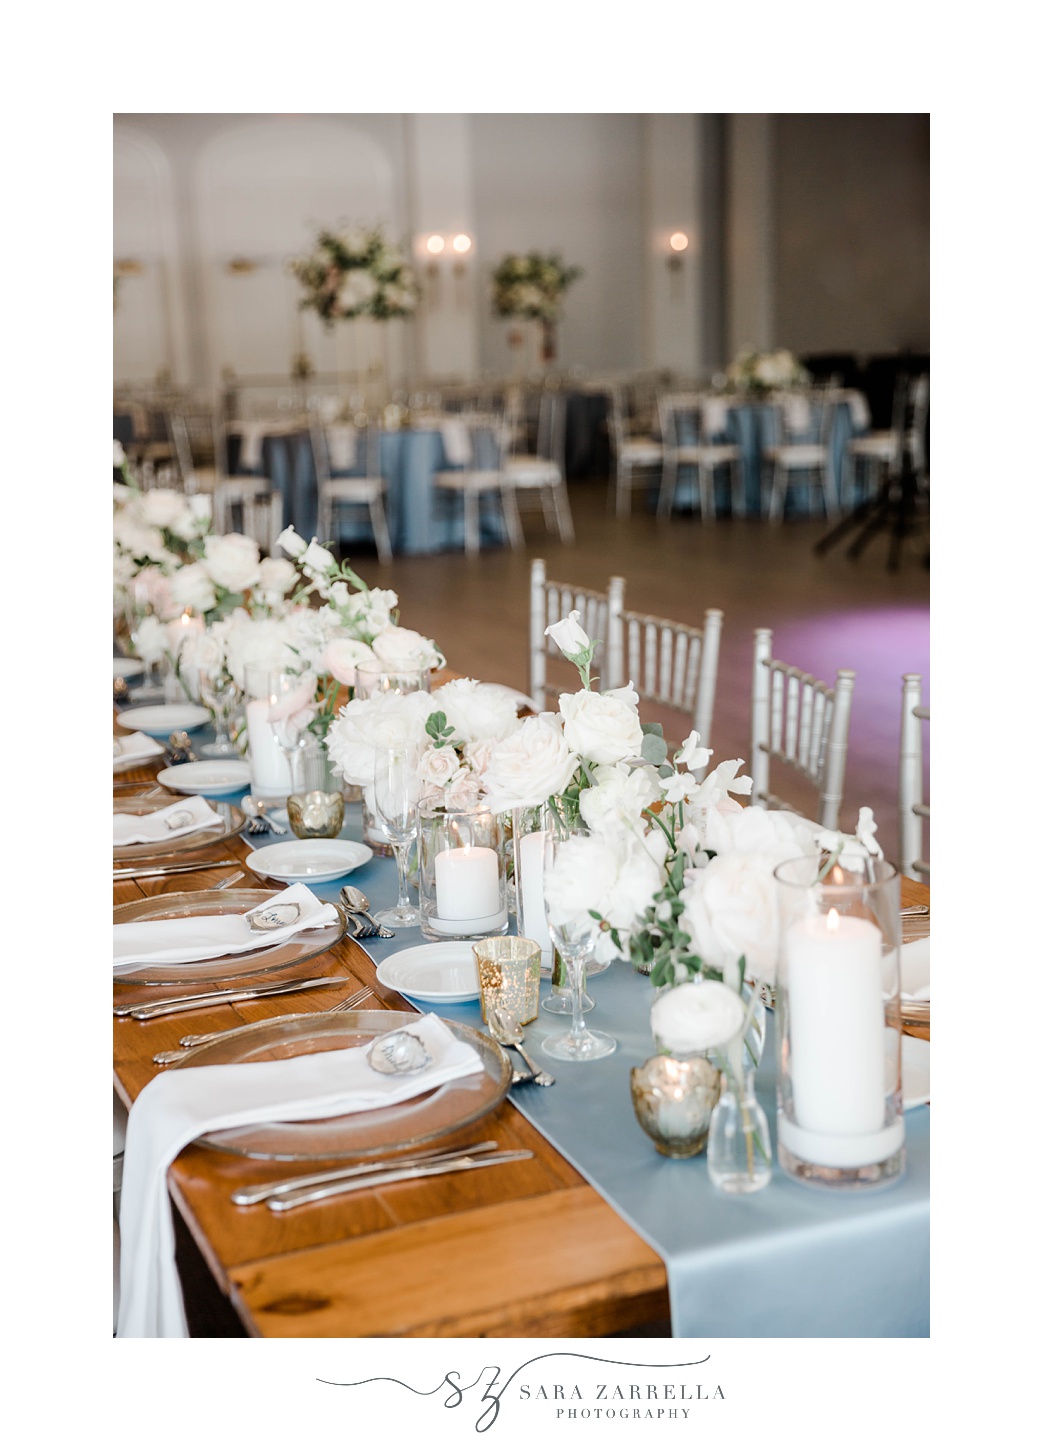 place settings with blue table runner for elegant reception at Gurney's Resort